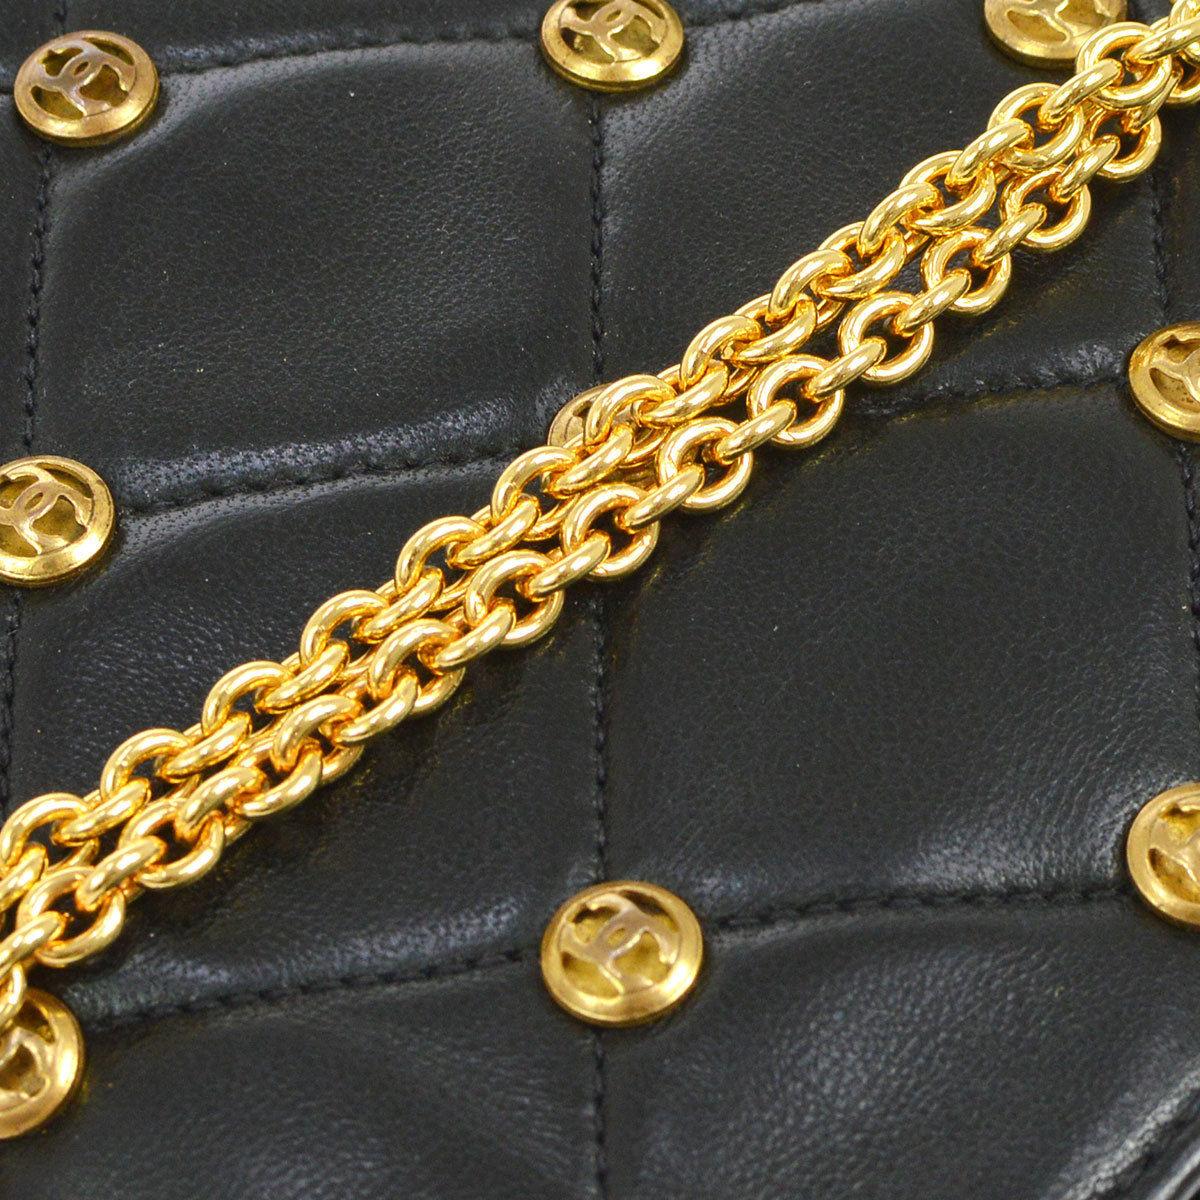 Chanel Black Leather Gold Logo Coin Clutch Evening Small Party Shoulder Flap Bag

Lambskin
Gold tone hardware
Leather lining
Date code present
Made in France
Interior features built in mirror 
Shoulder strap 20.5